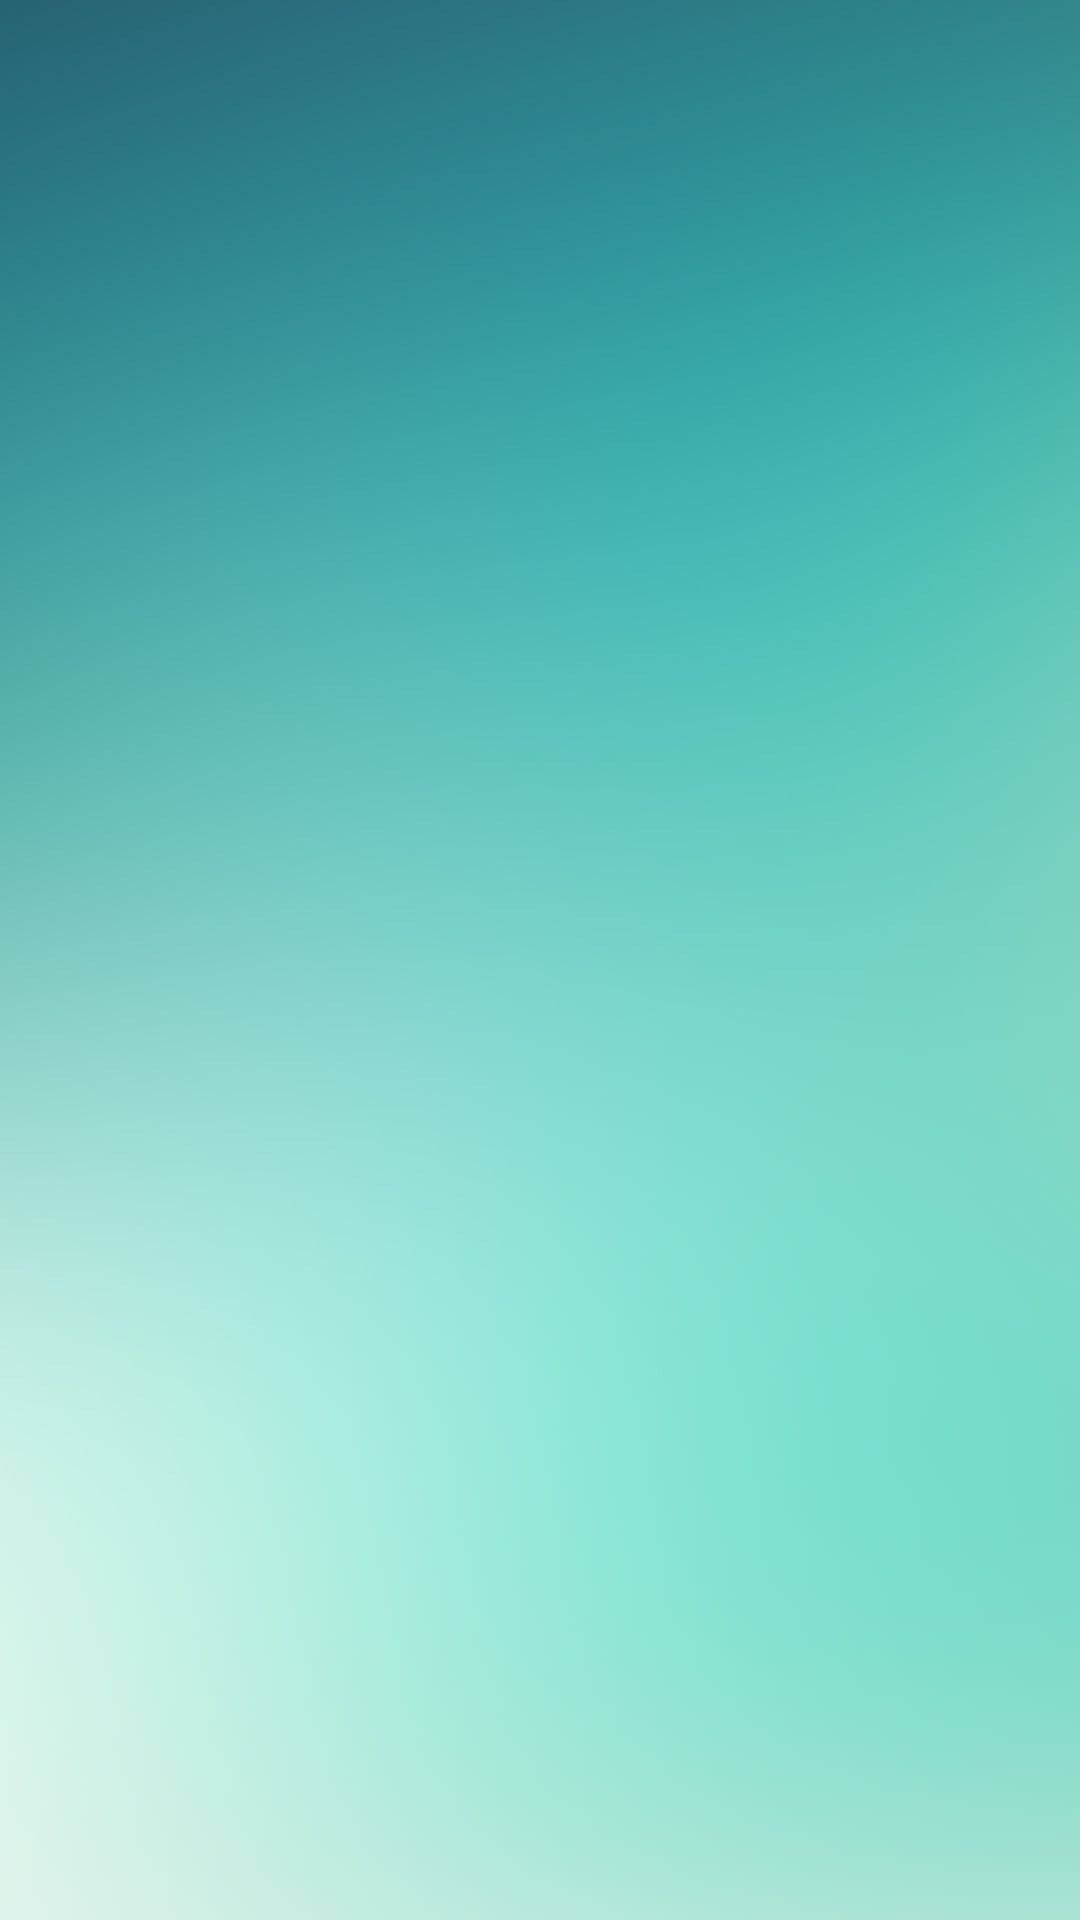 Turquoise Color iPhone Wallpaper